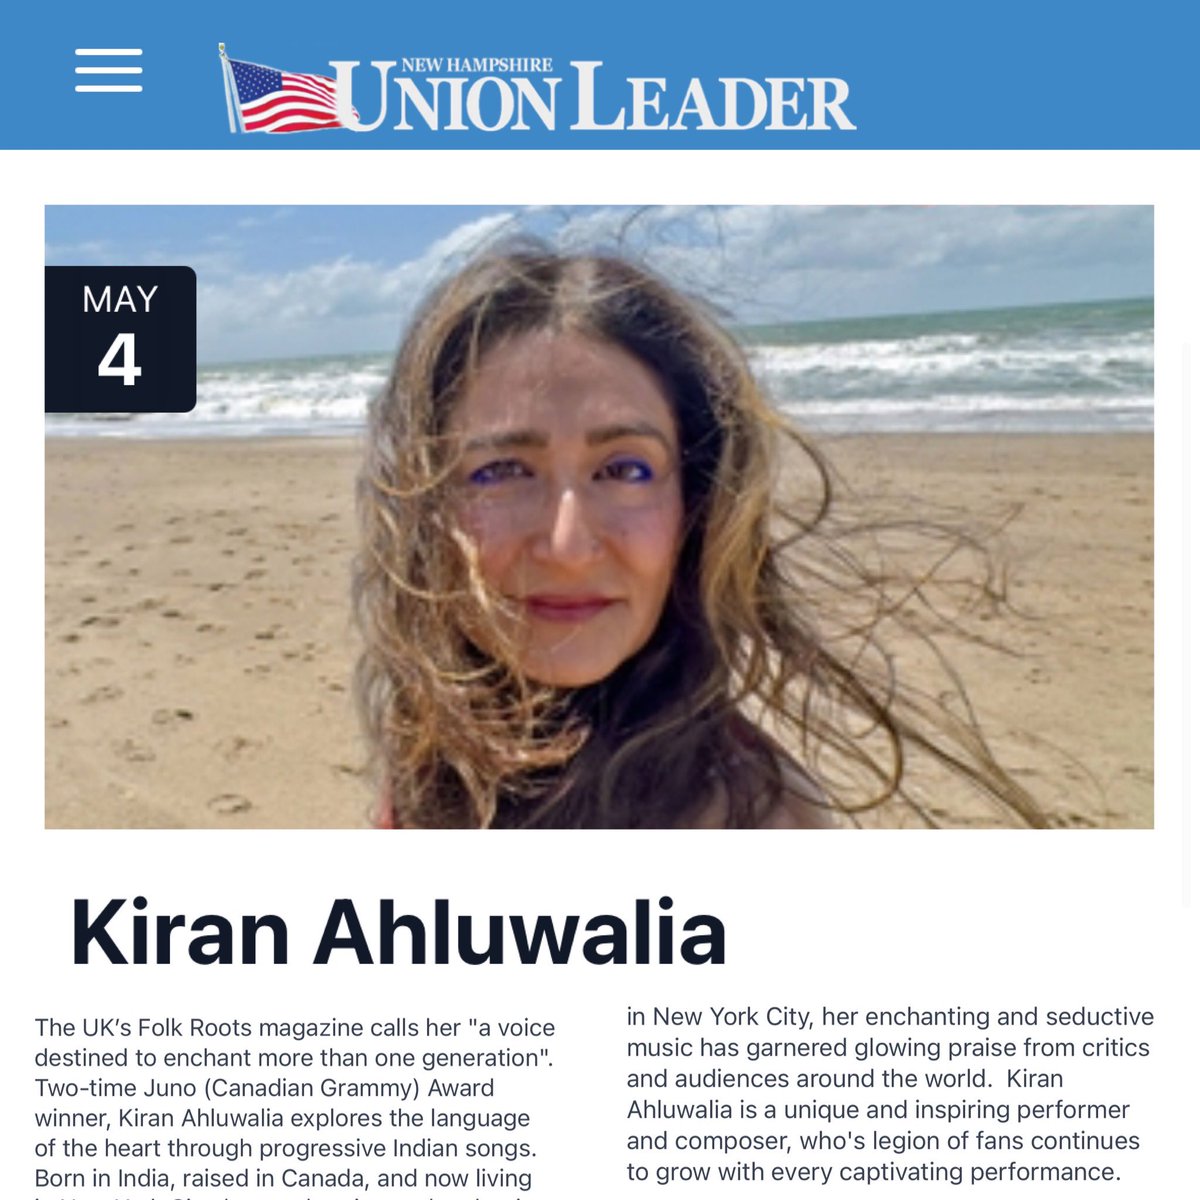 Thanks to @UnionLeader for featuring Kiran Ahluwali’s 5/4 concert in at Lexington’s @masonmuseum — the kickoff to her US tour supporting her new album Comfort Food! 🎟️ Tix + Tour Dates: kiranmusic.com/concerts 💿 New Album: kiranahluwalia1.bandcamp.com @lexcommunityed